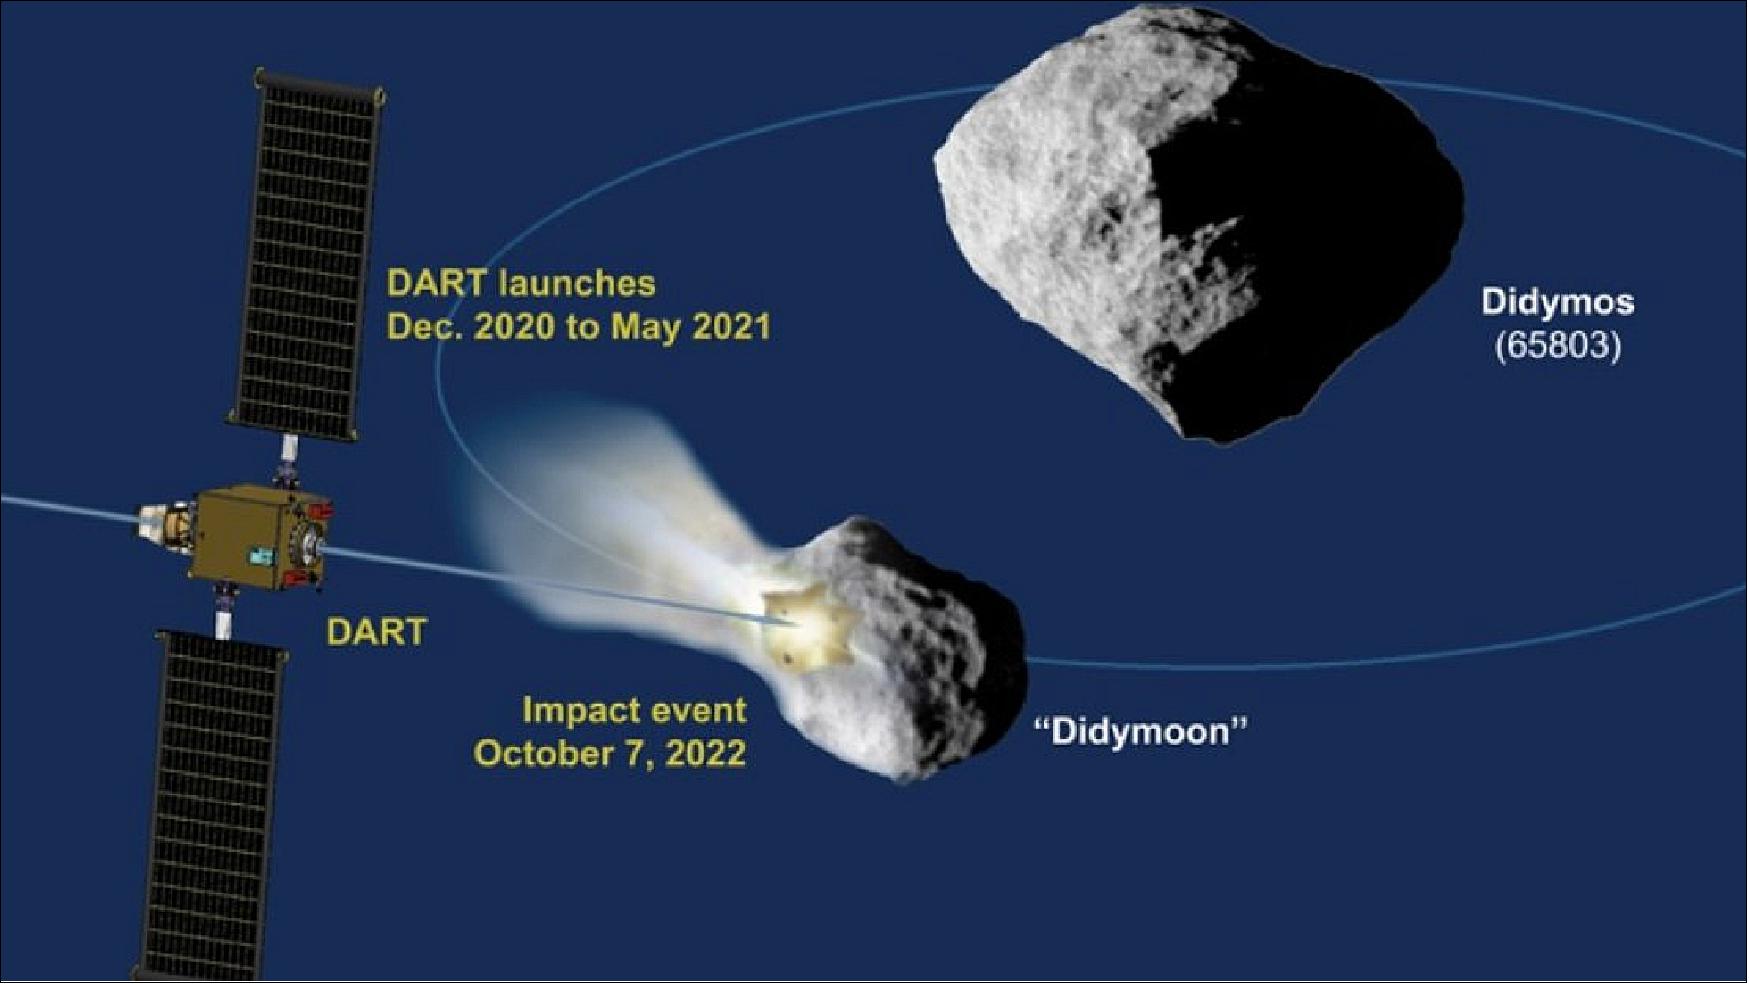 Figure 56: NASA's DART (Double Asteroid Redirect Test) mission, the US component of AIDA (Asteroid Impact Deflection Assessment), impacting on the asteroid Didymoon. ESA's Hera mission will then perform follow-up post-impact observations (image credit: NASA, ESA)